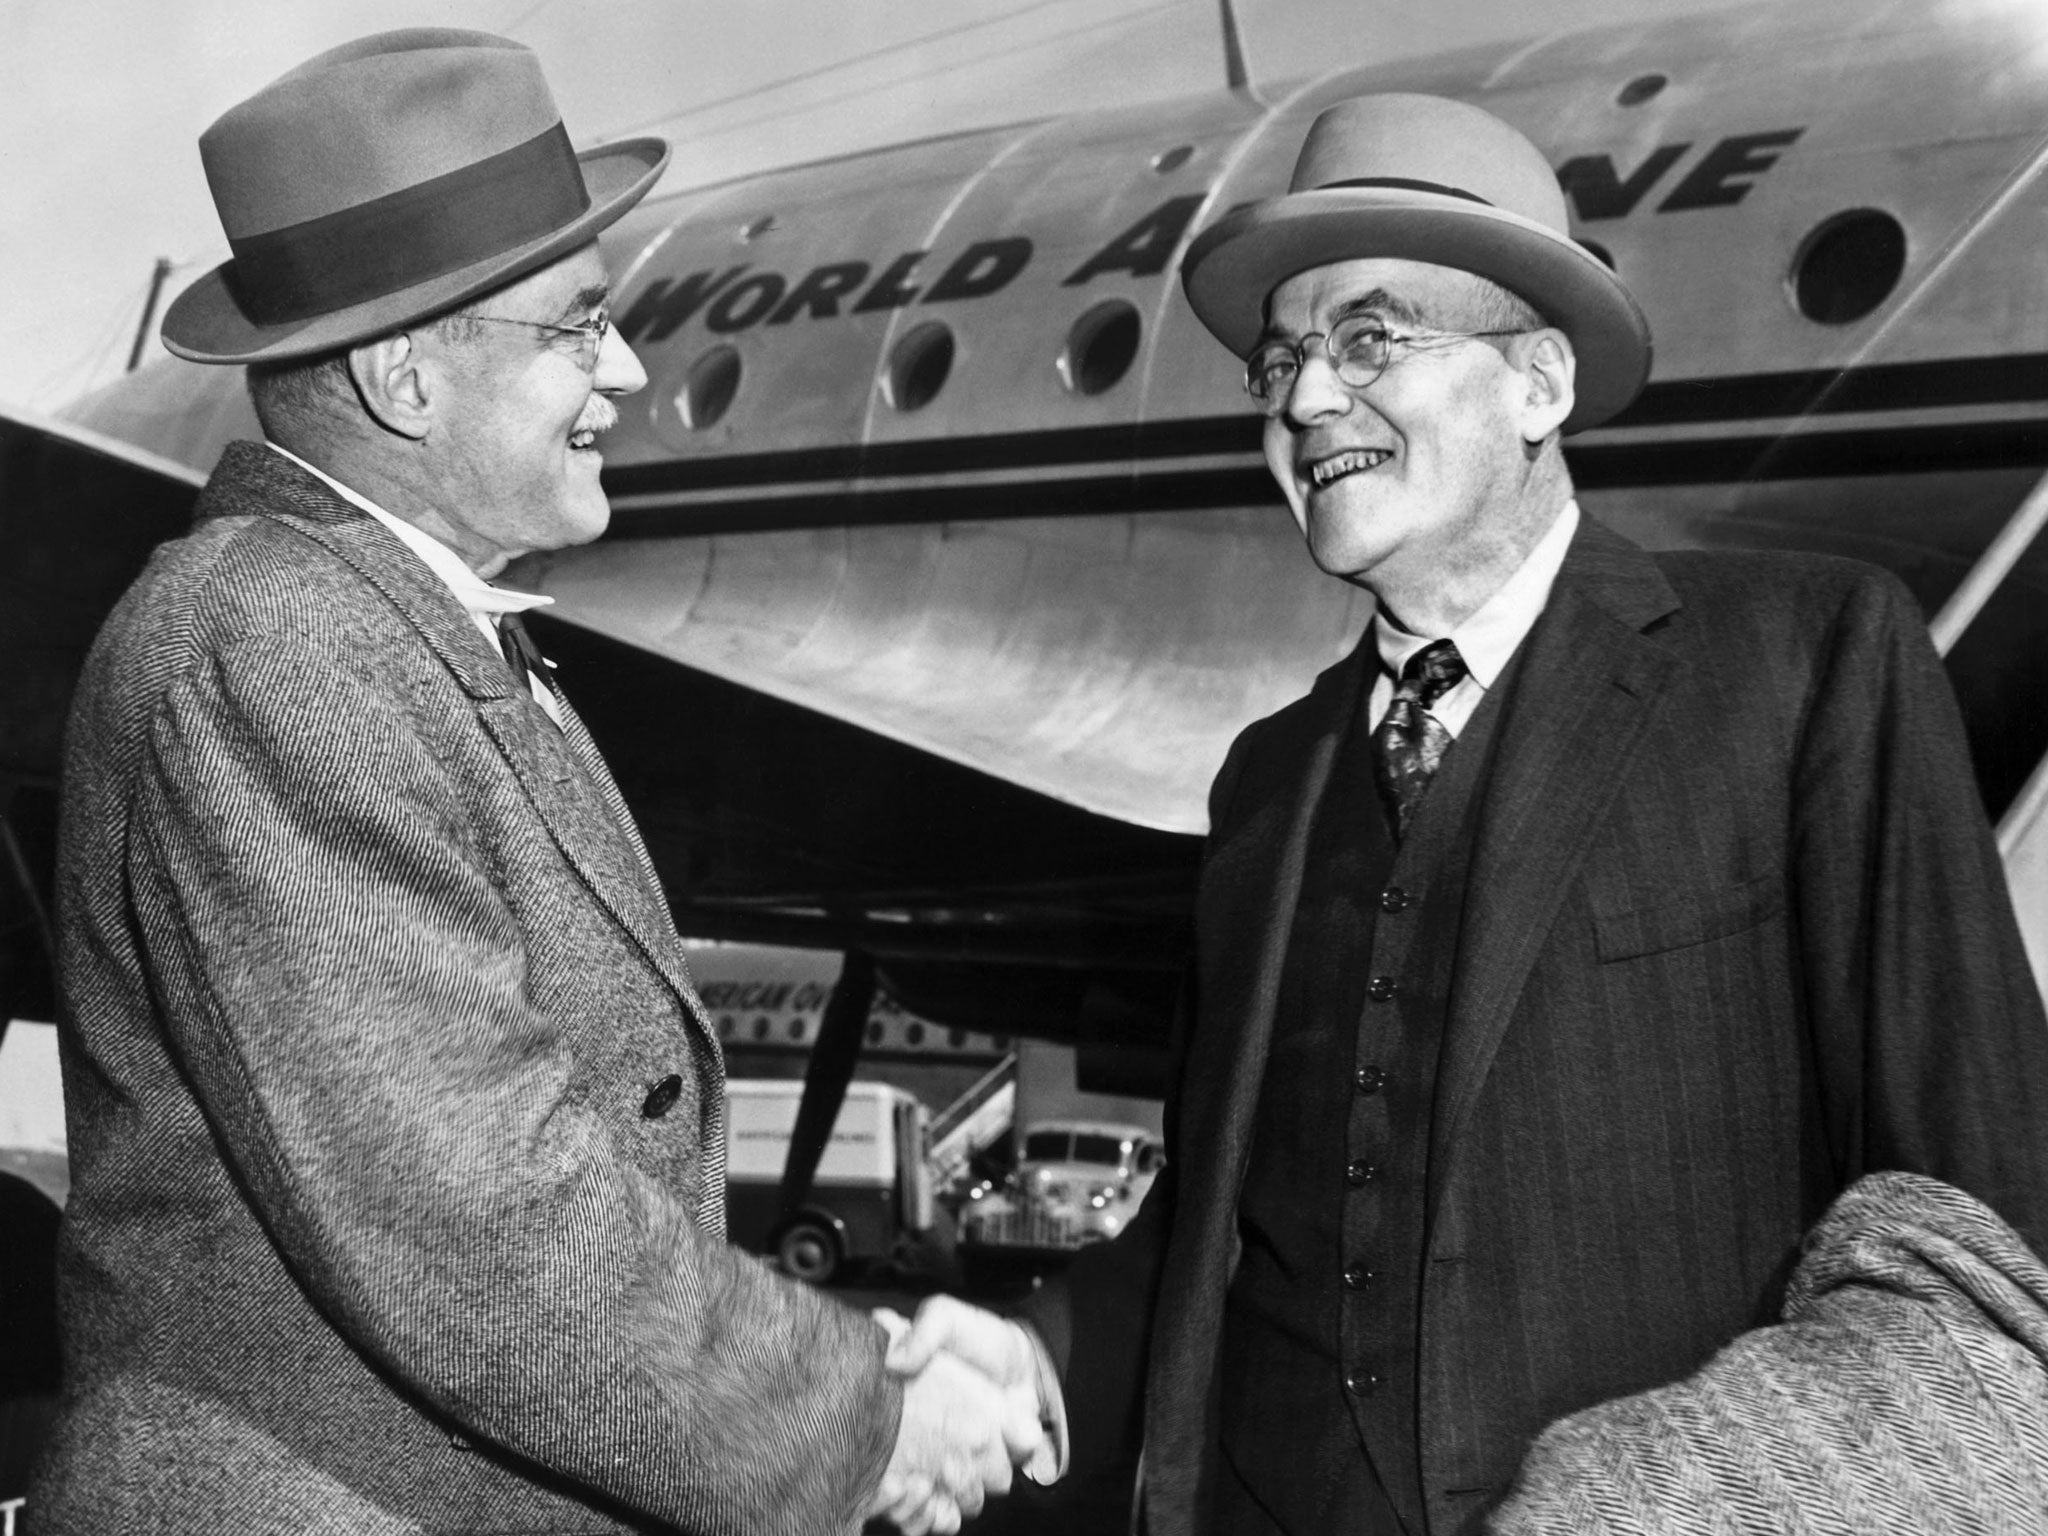 John Foster Dulles greets his brother Alan at the airport